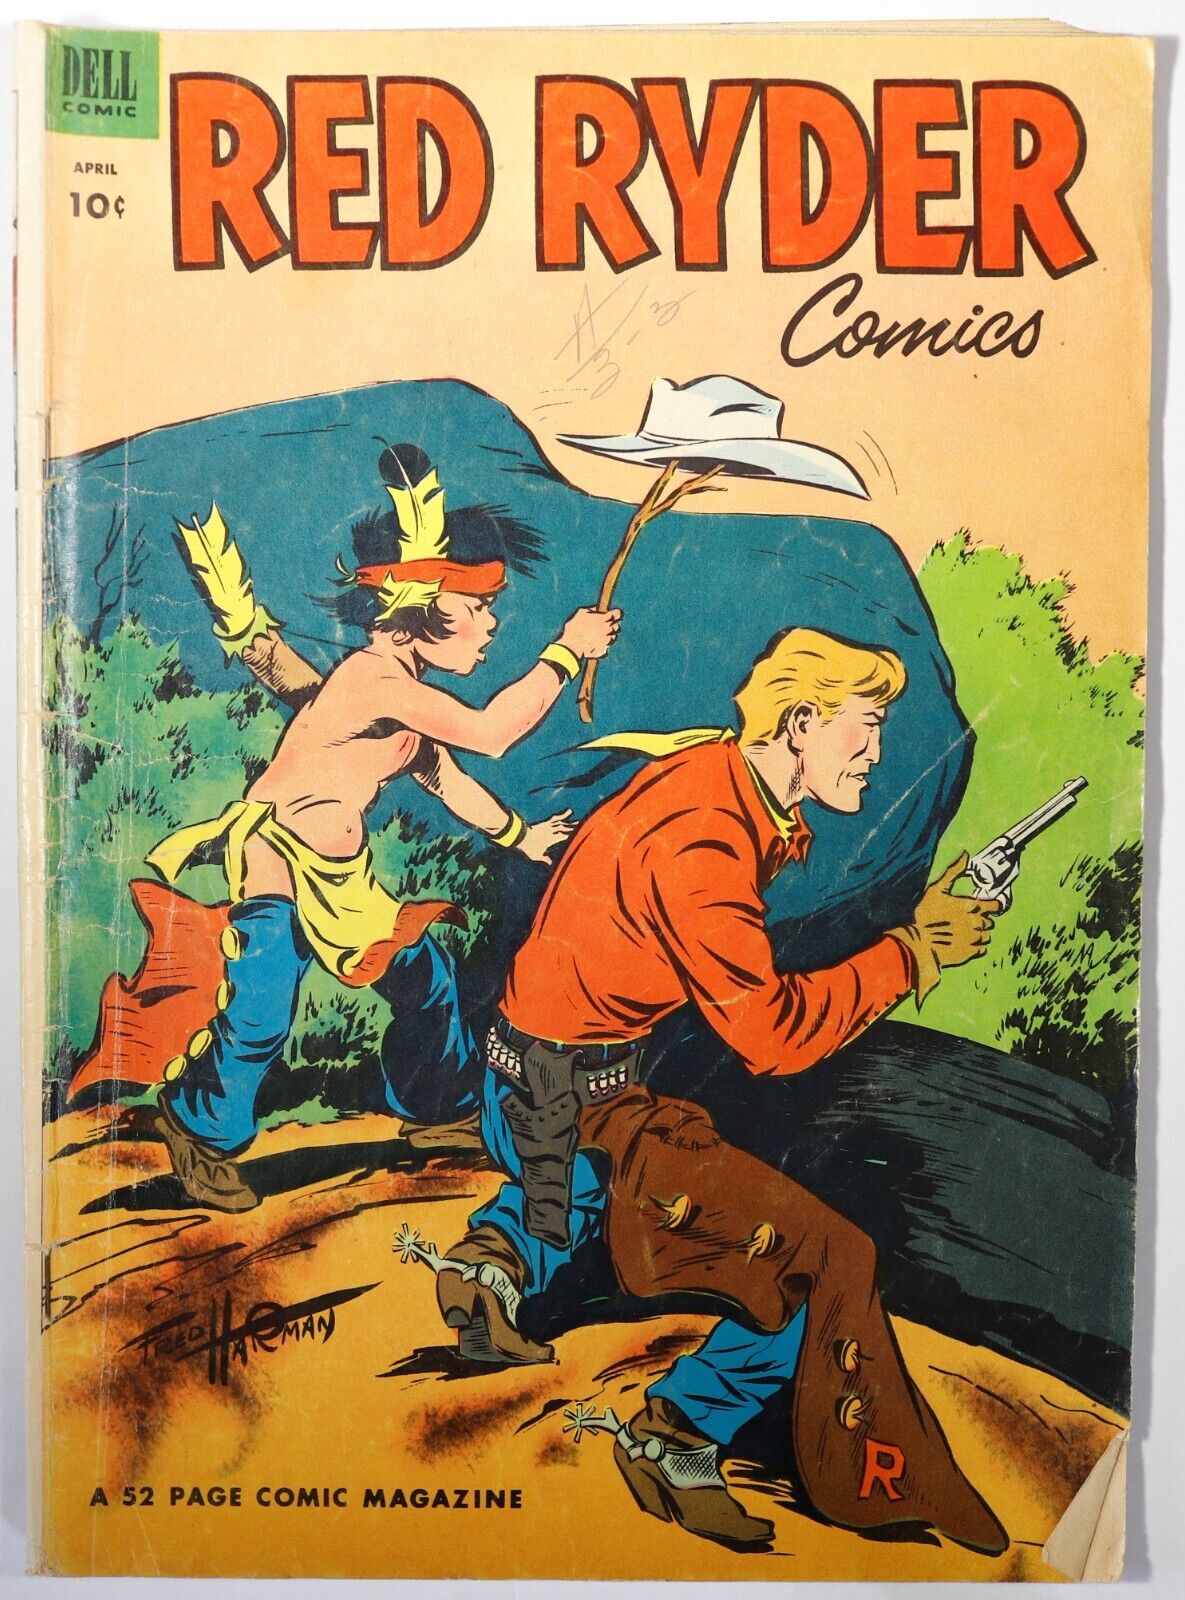 Red Ryder Comics #117 - $0.10 Dell Comics, Apr. 1953 - 52 pages - GD/VG